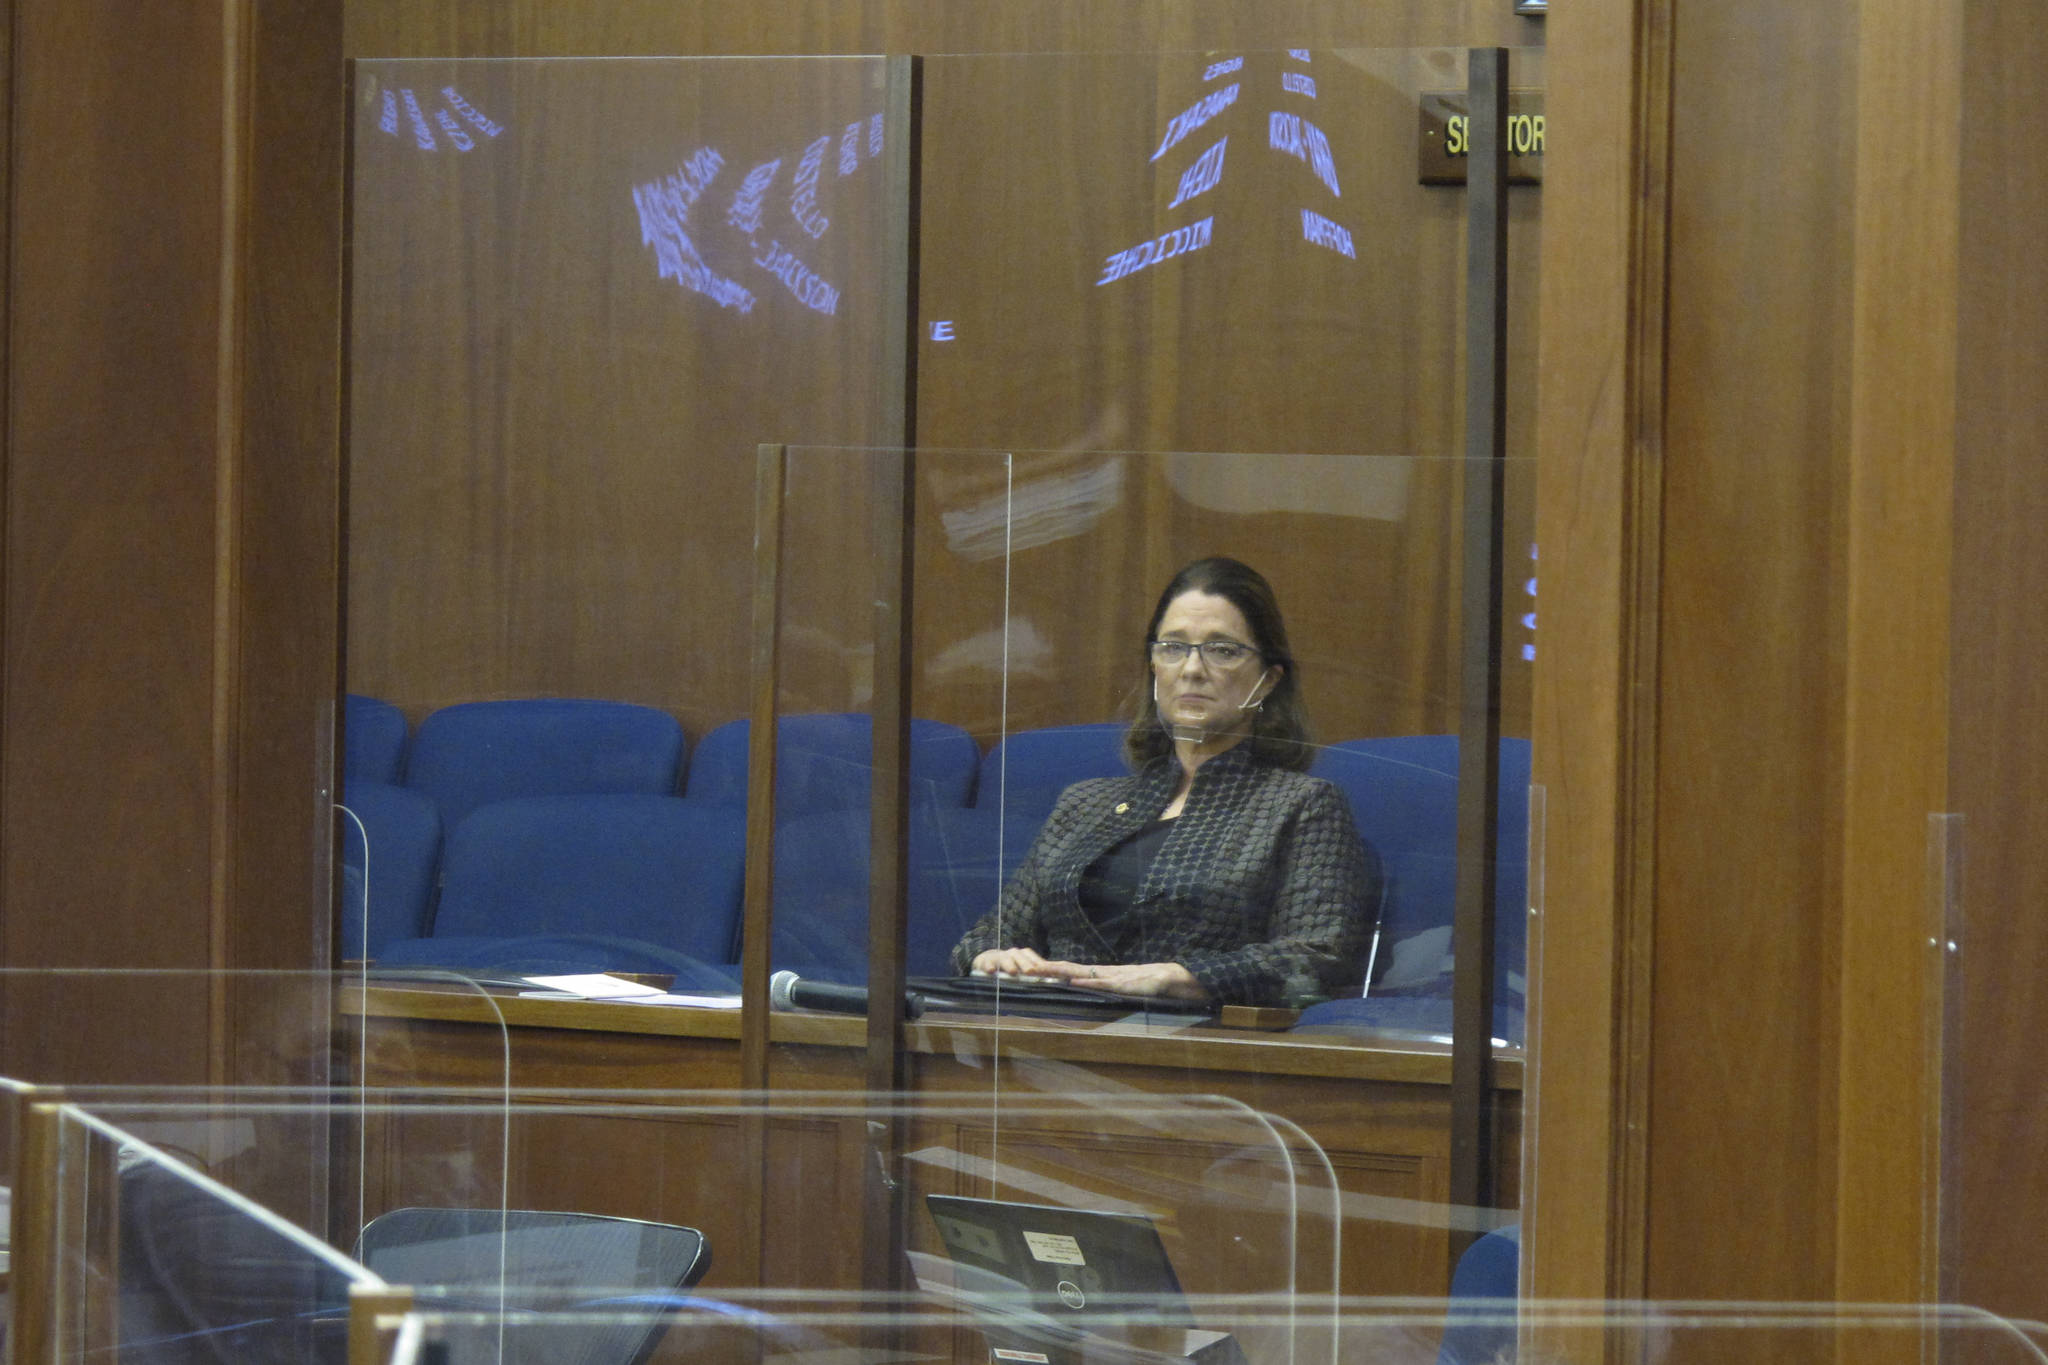 Alaska state Sen. Lora Reinbold sits in a Senate gallery on Friday, in Juneau. The Alaska Senate voted Wednesday to allow leadership to restrict access to the Capitol by Reinbold, an Eagle River Republican, over violations of protocols meant to guard against COVID-19. (AP Photo/Becky Bohrer, Pool)